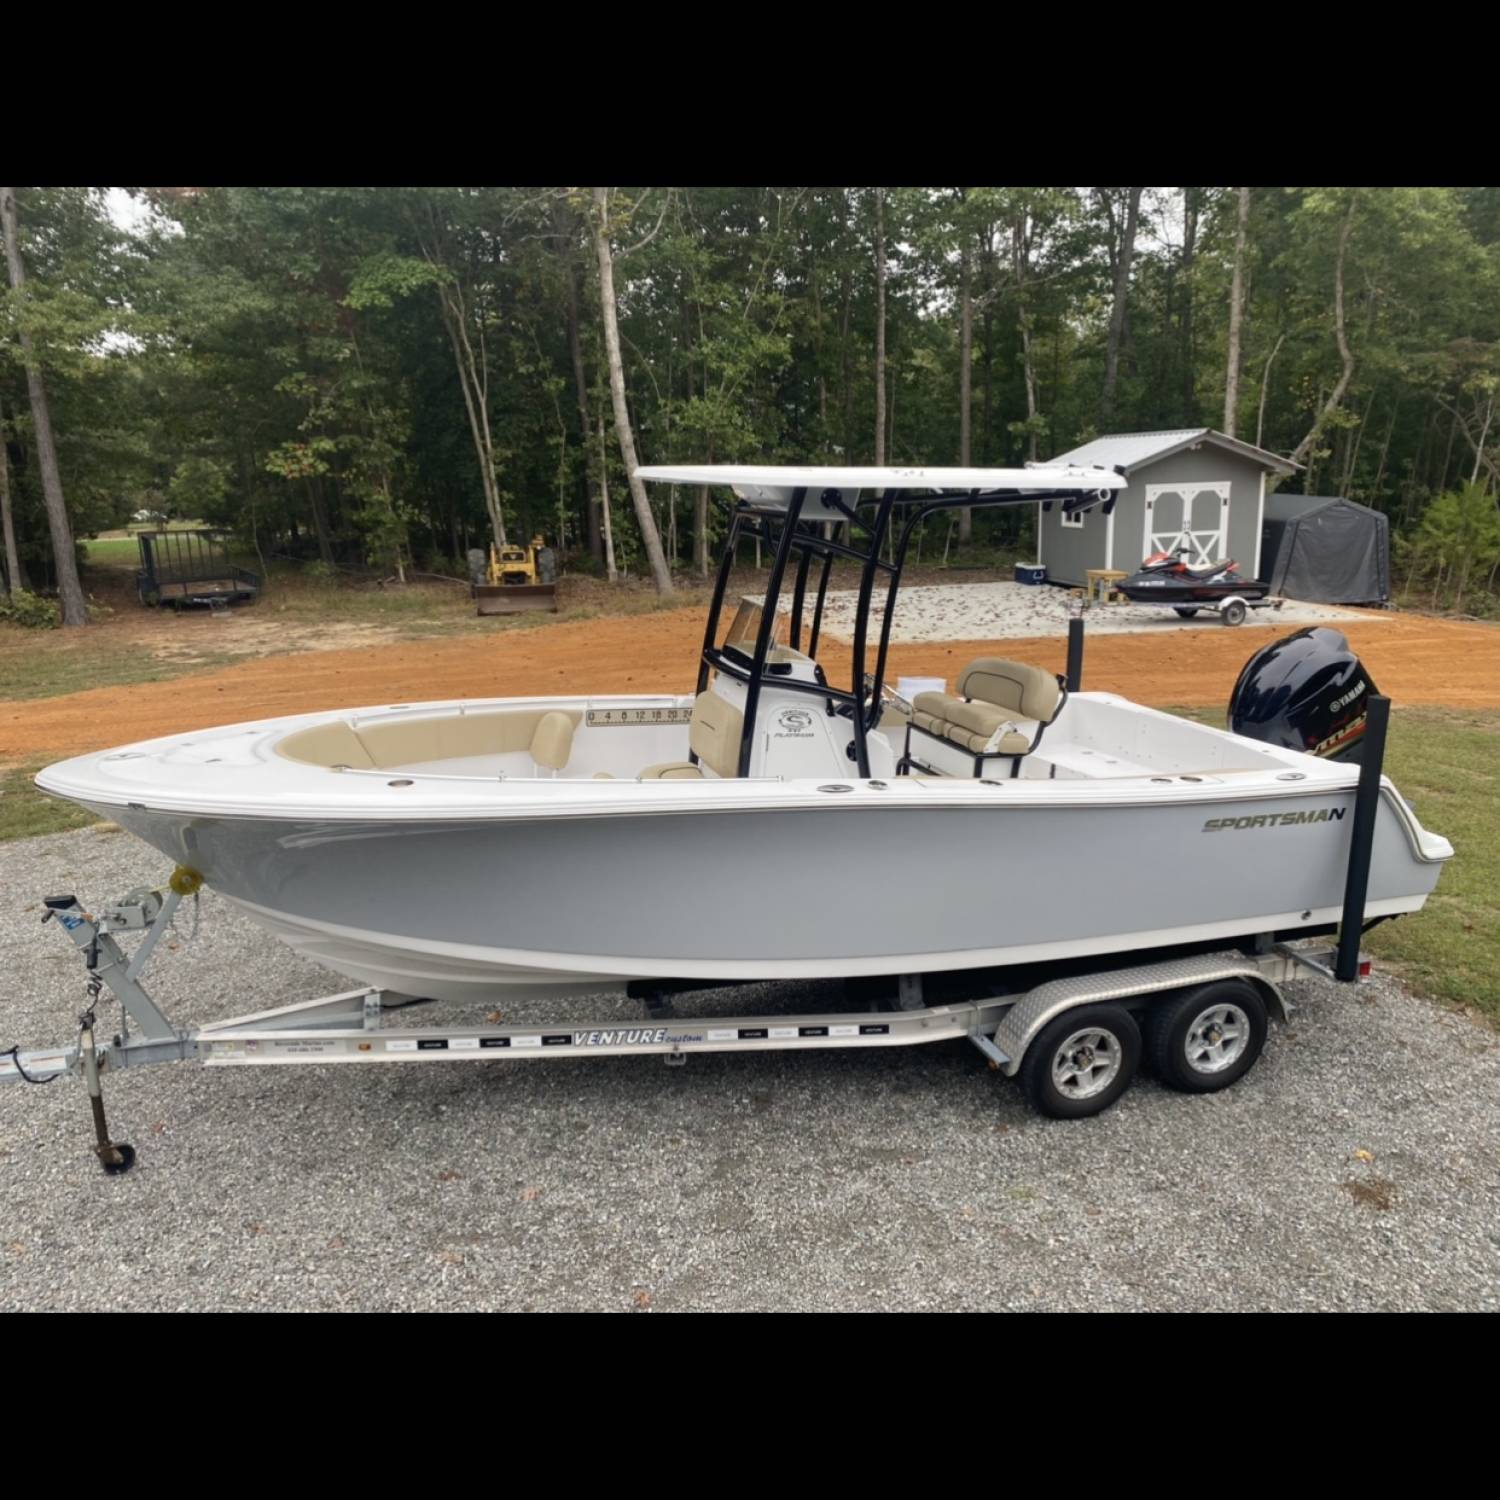 Title: Clean and ready for the season - On board their Sportsman Heritage 231 Center Console - Location: Urbanna va. Participating in the Photo Contest #SportsmanMay